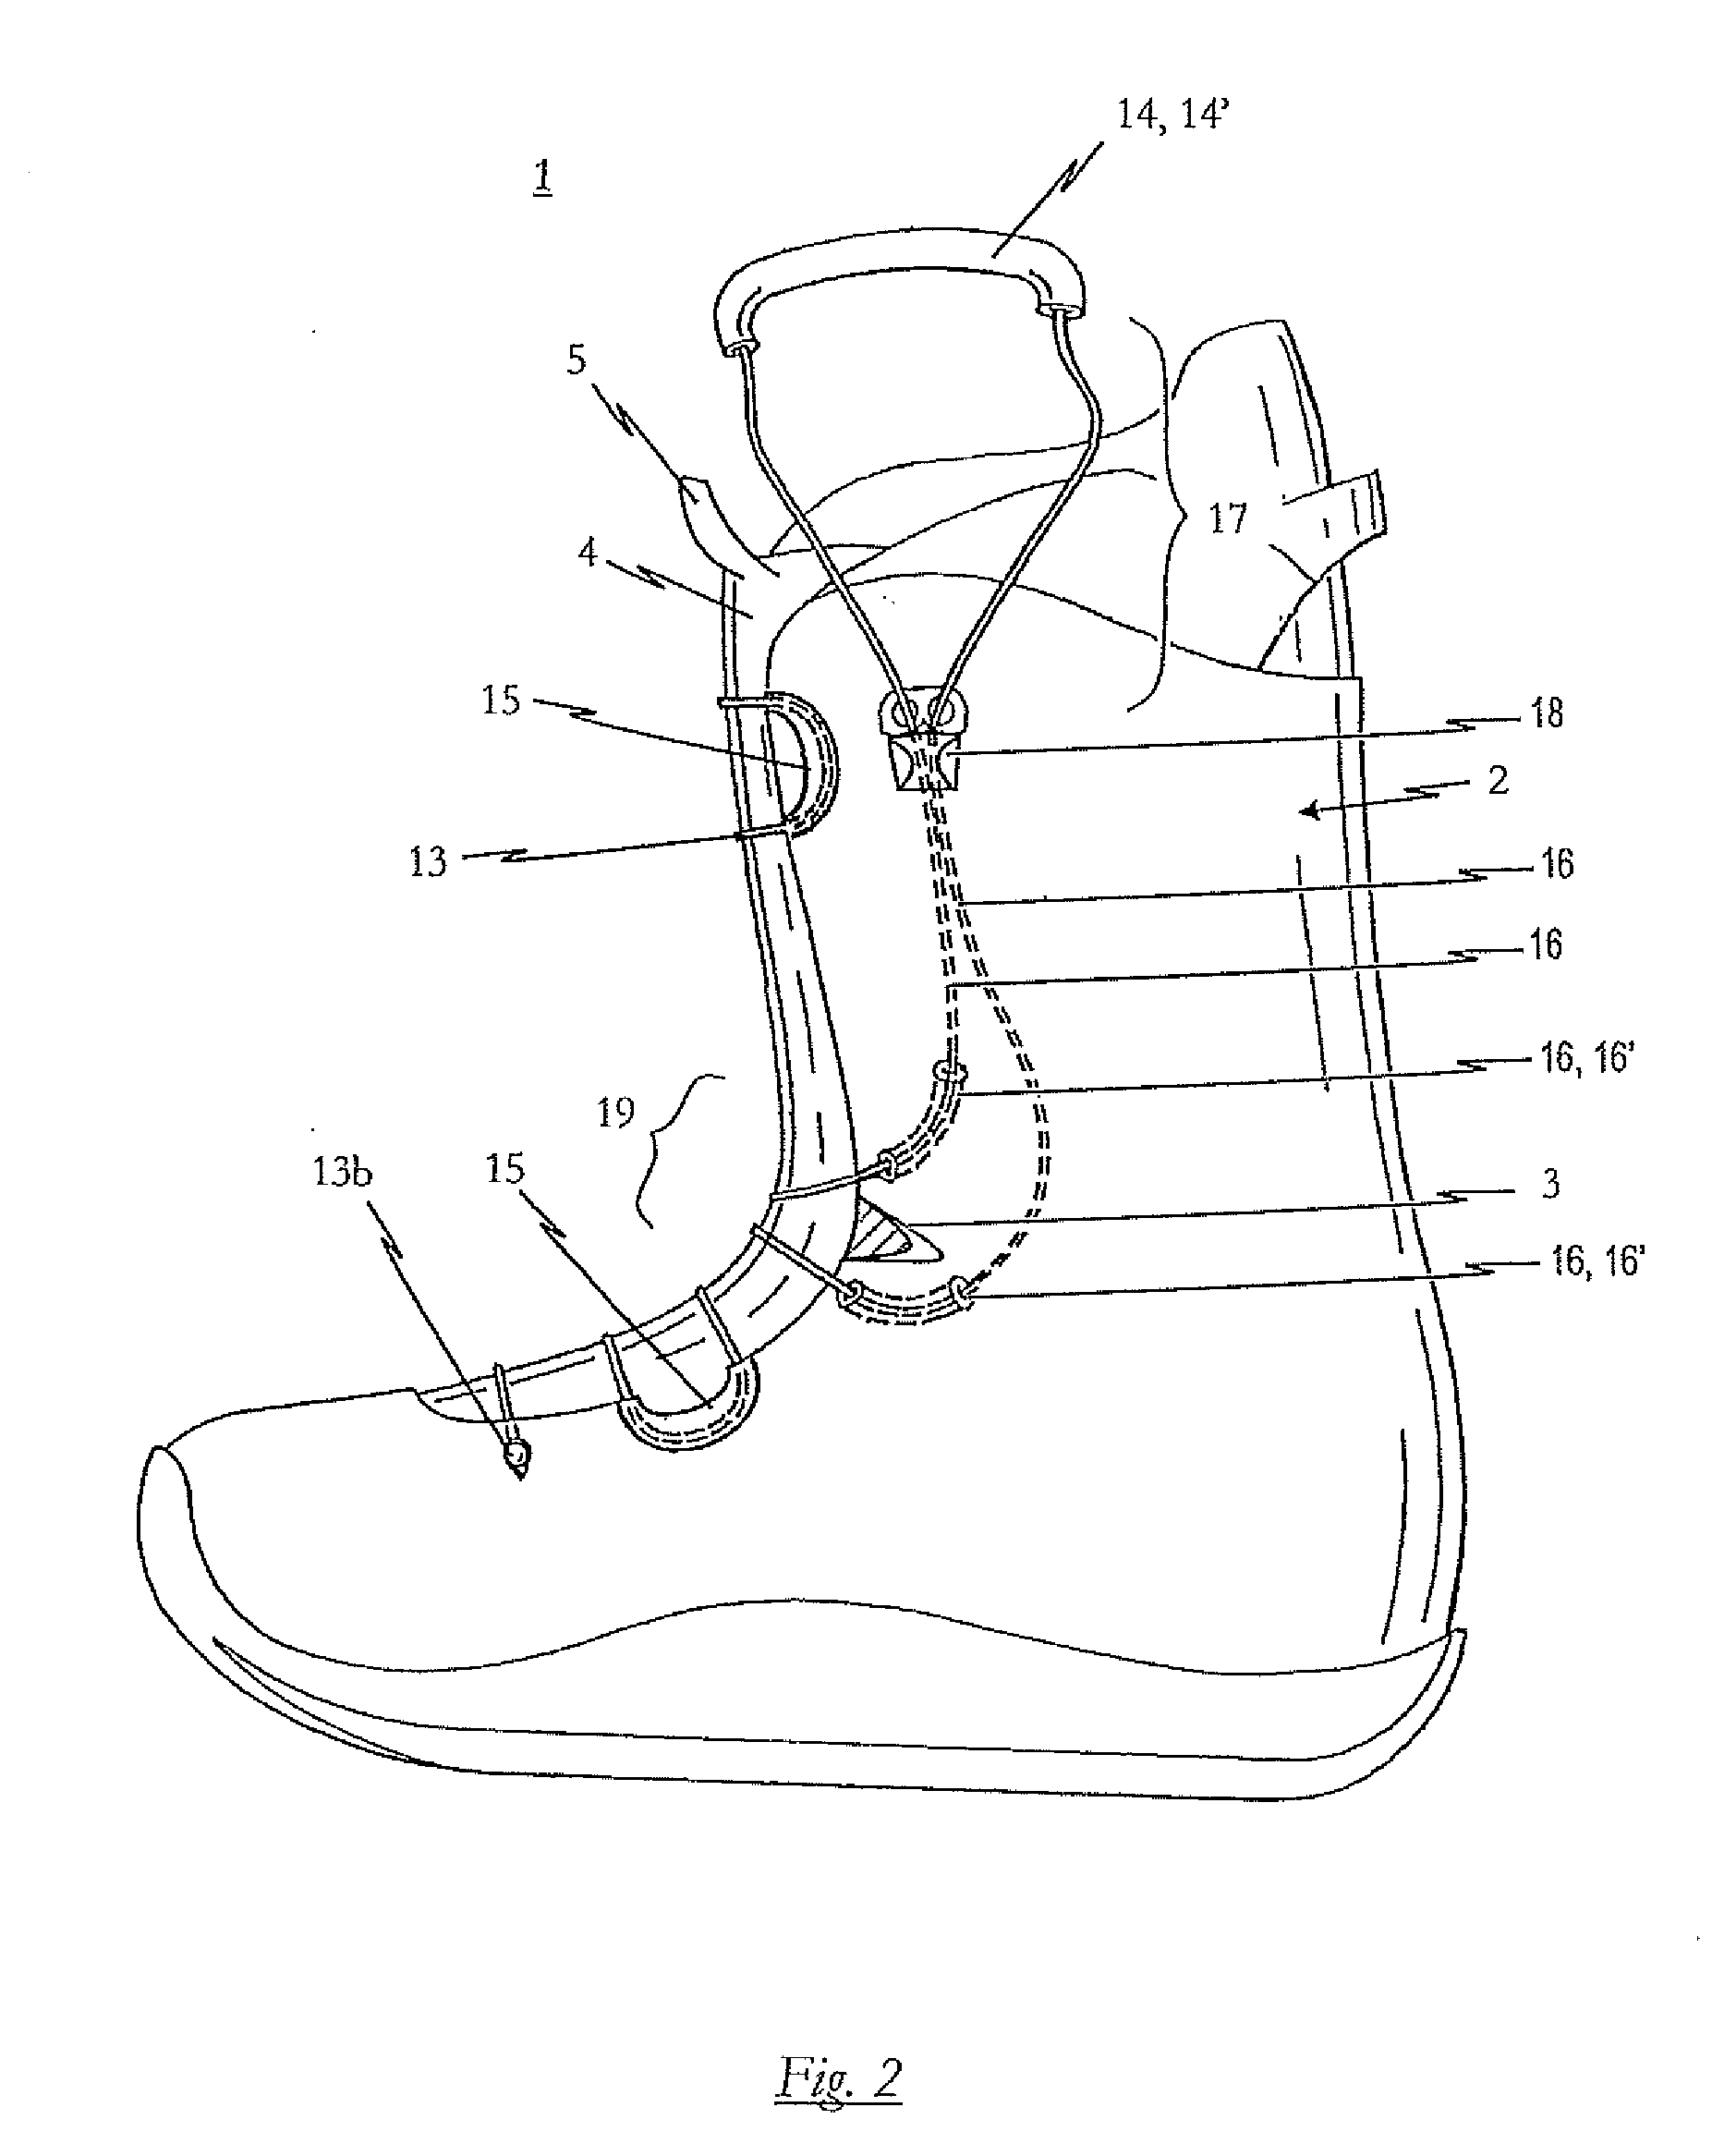 Boot in particular ski or snowboard boot